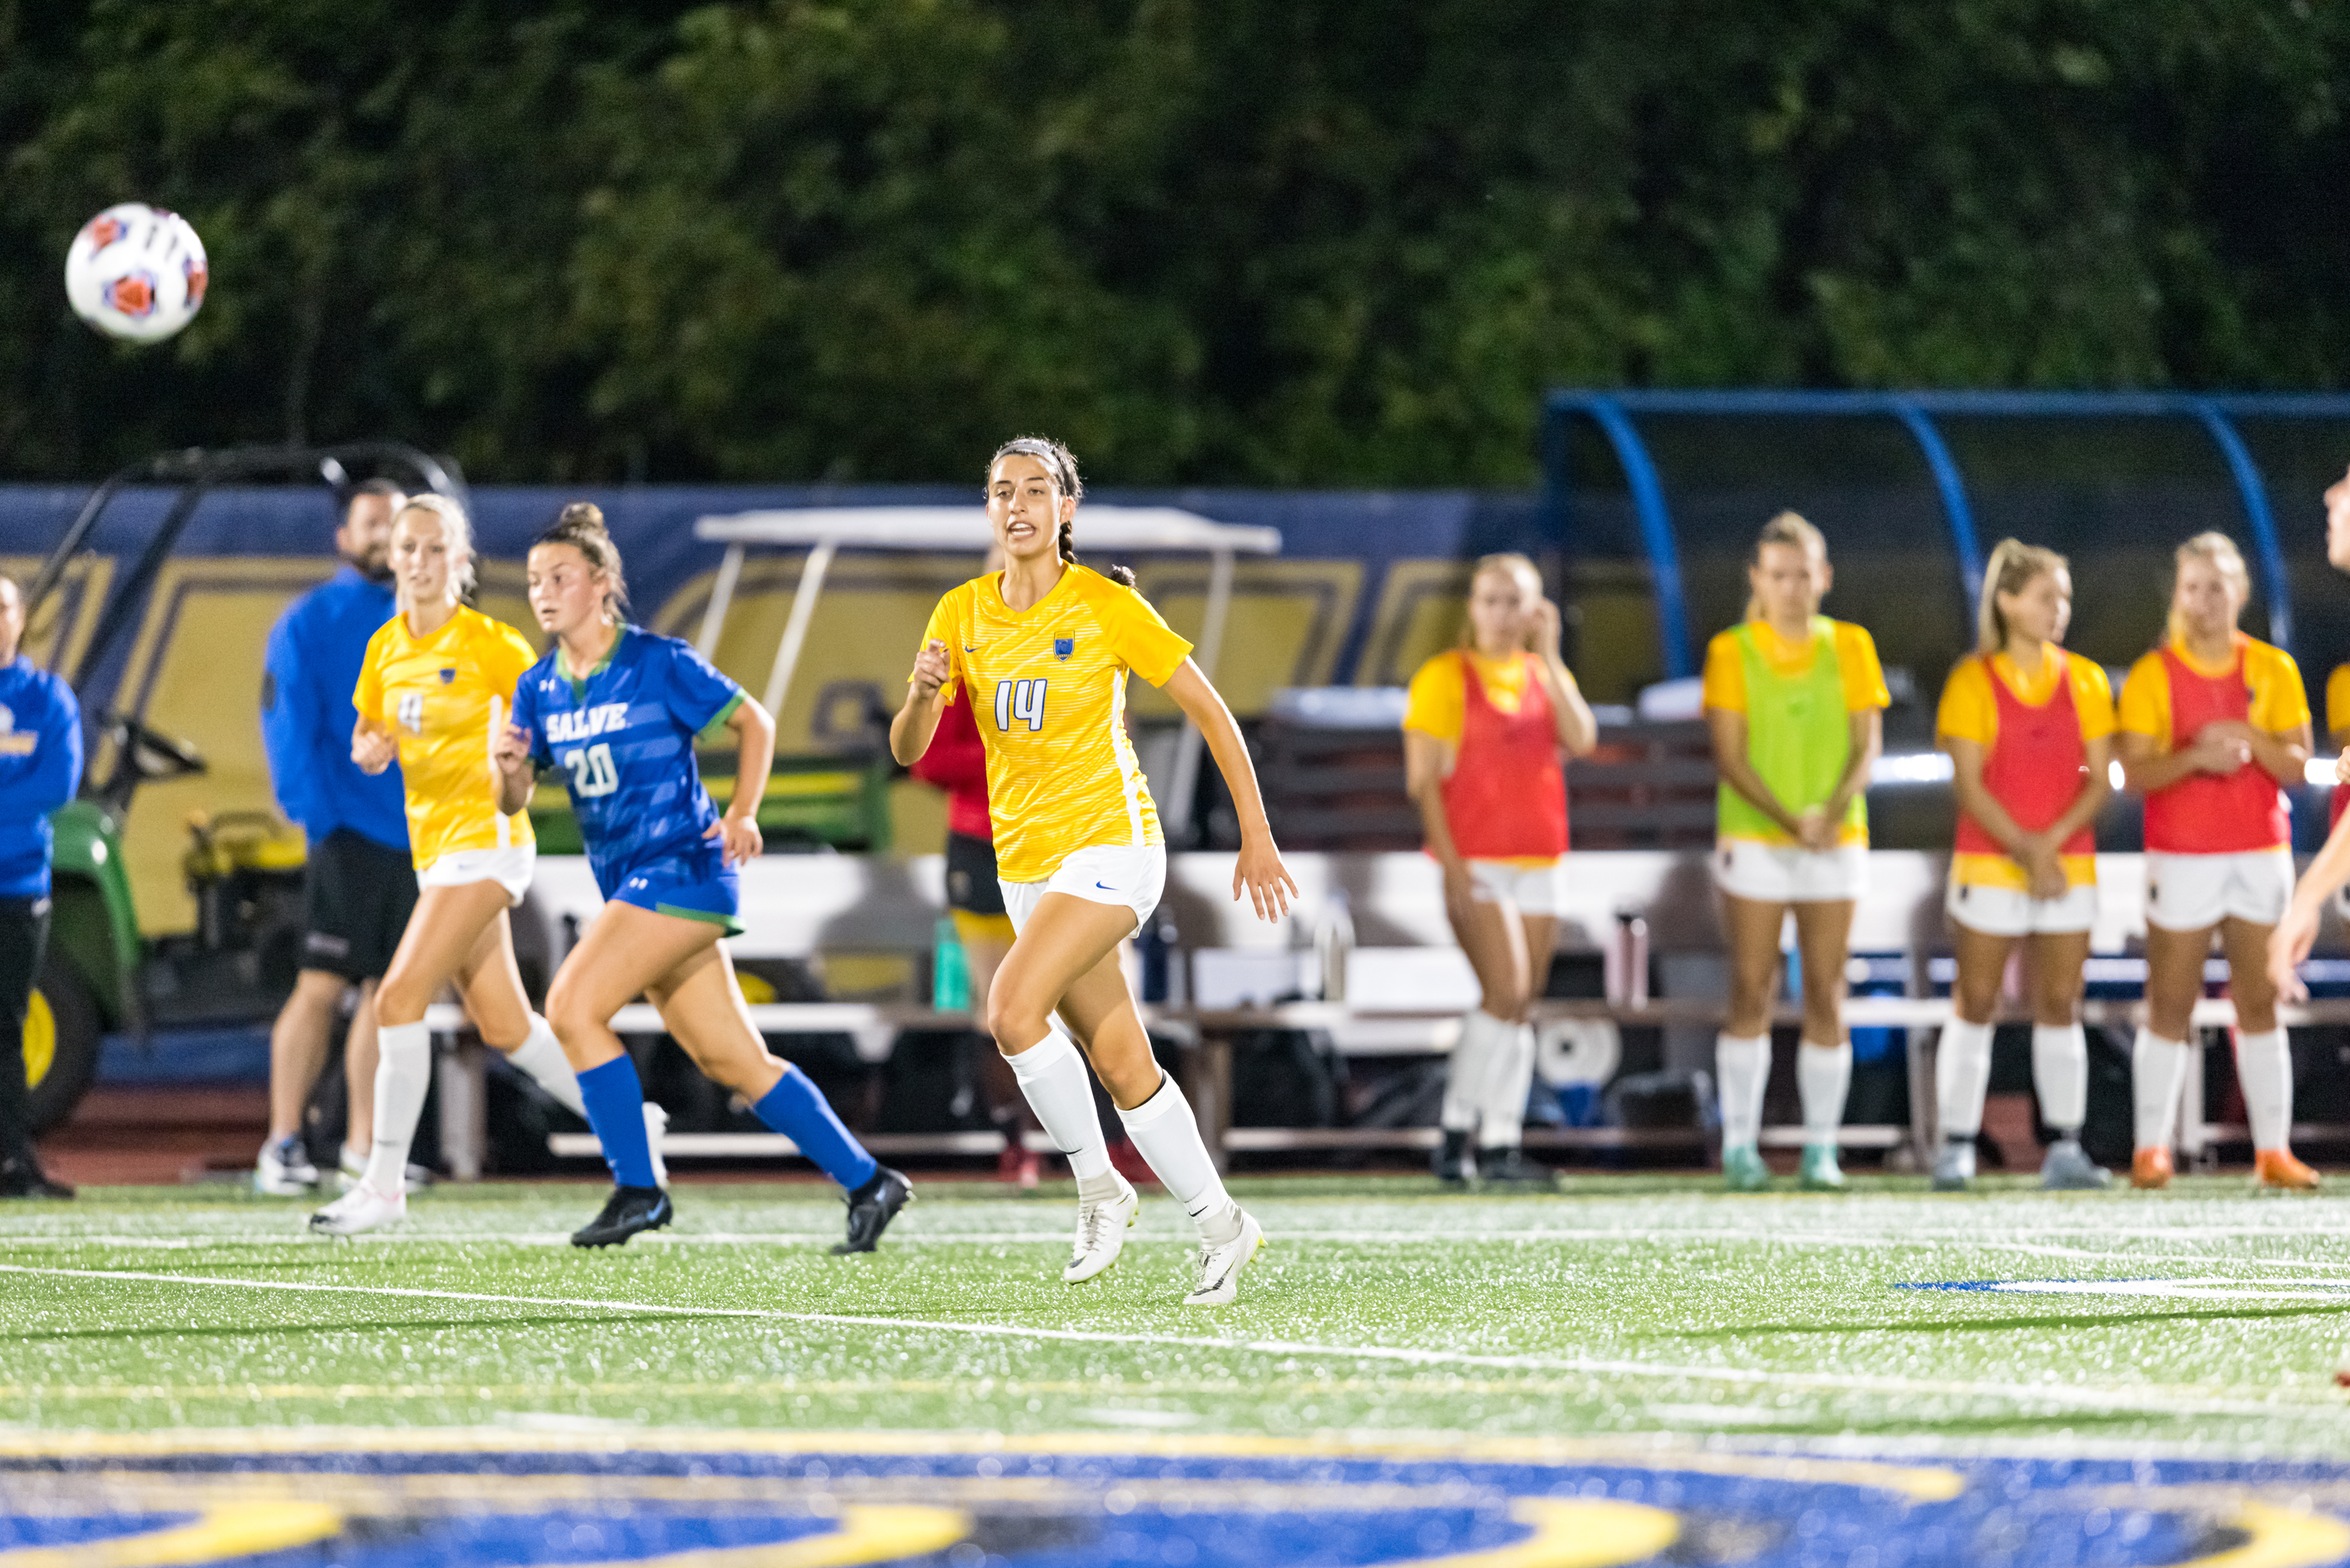 Worcester State Falls to Clark